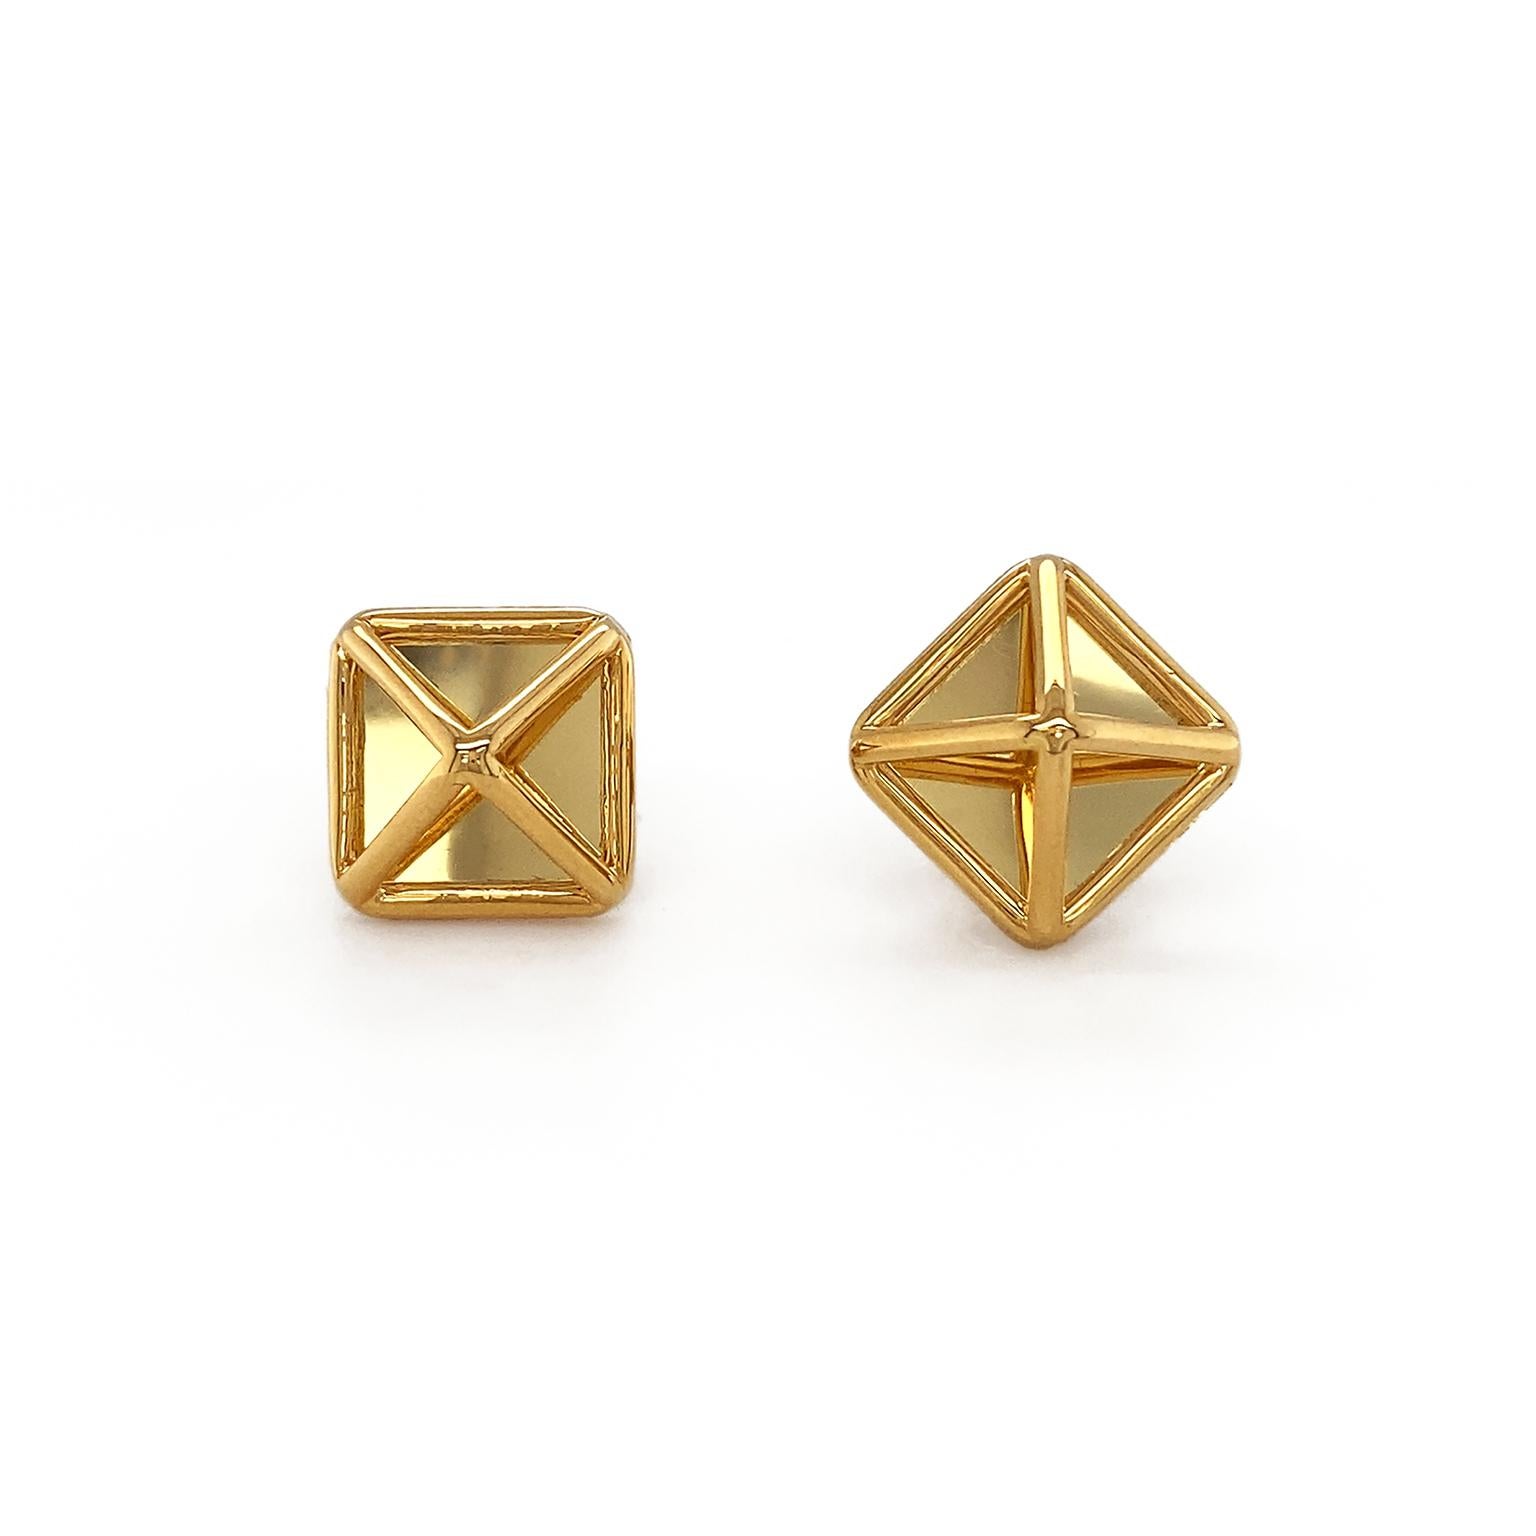 The brilliance of gold is given prominence. A polished 18k yellow gold rhombus is the base with bars of the same material framing the edges. From each corner extends a gold arm that forms an openwork of a pyramid design. Your preference for